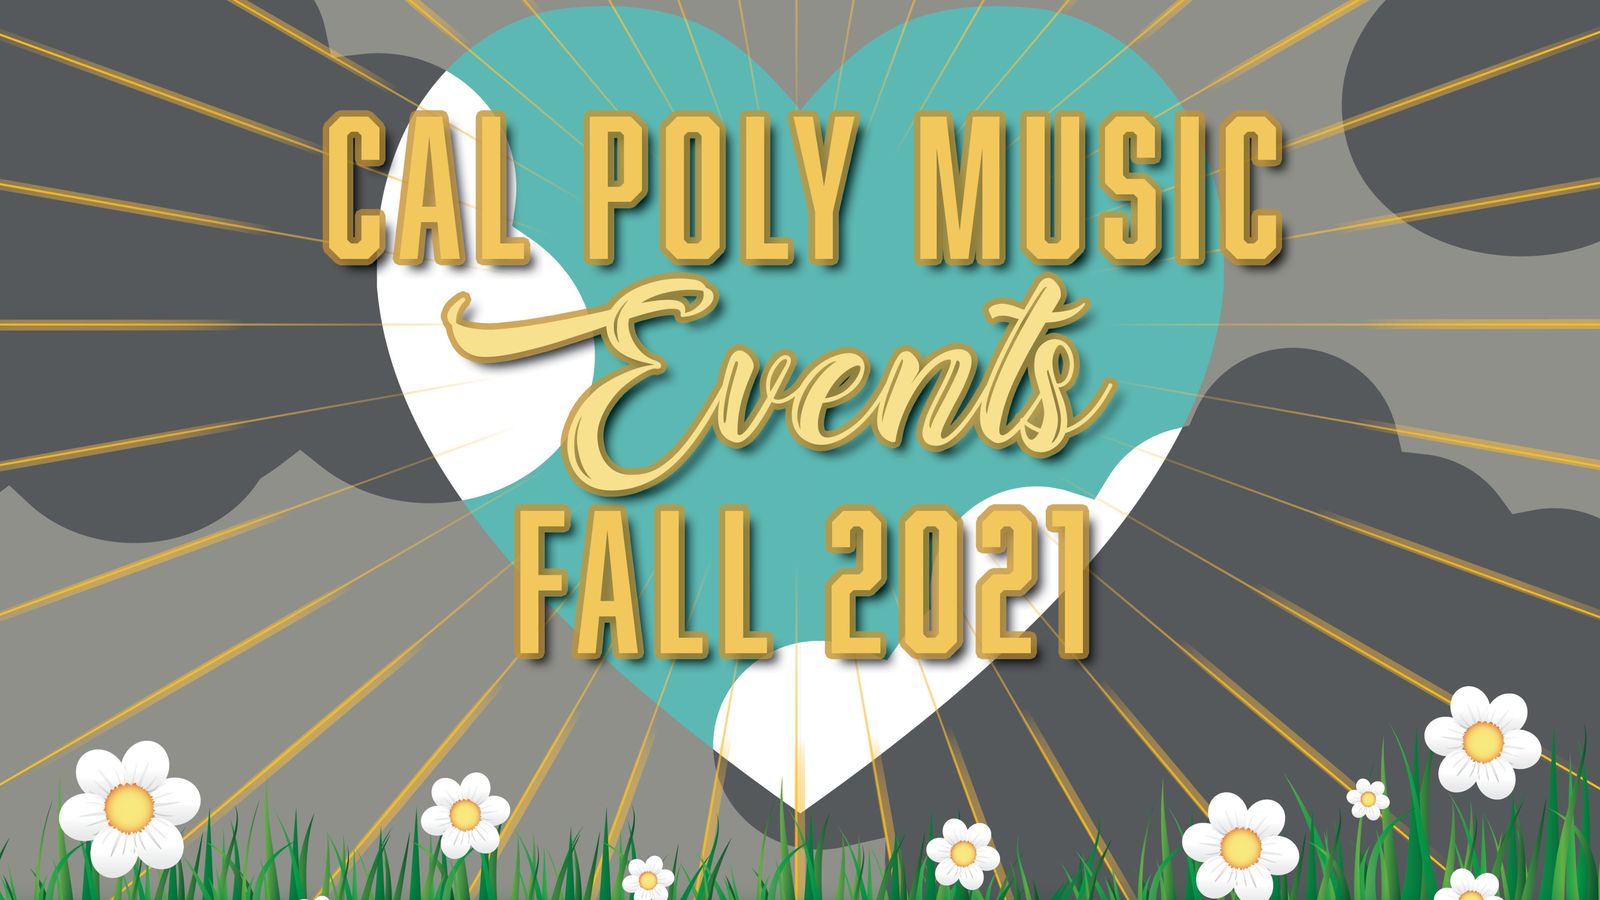 Graphic of a flower bed with a heart in the middle that says "Cal Poly Music Events Fall 2021